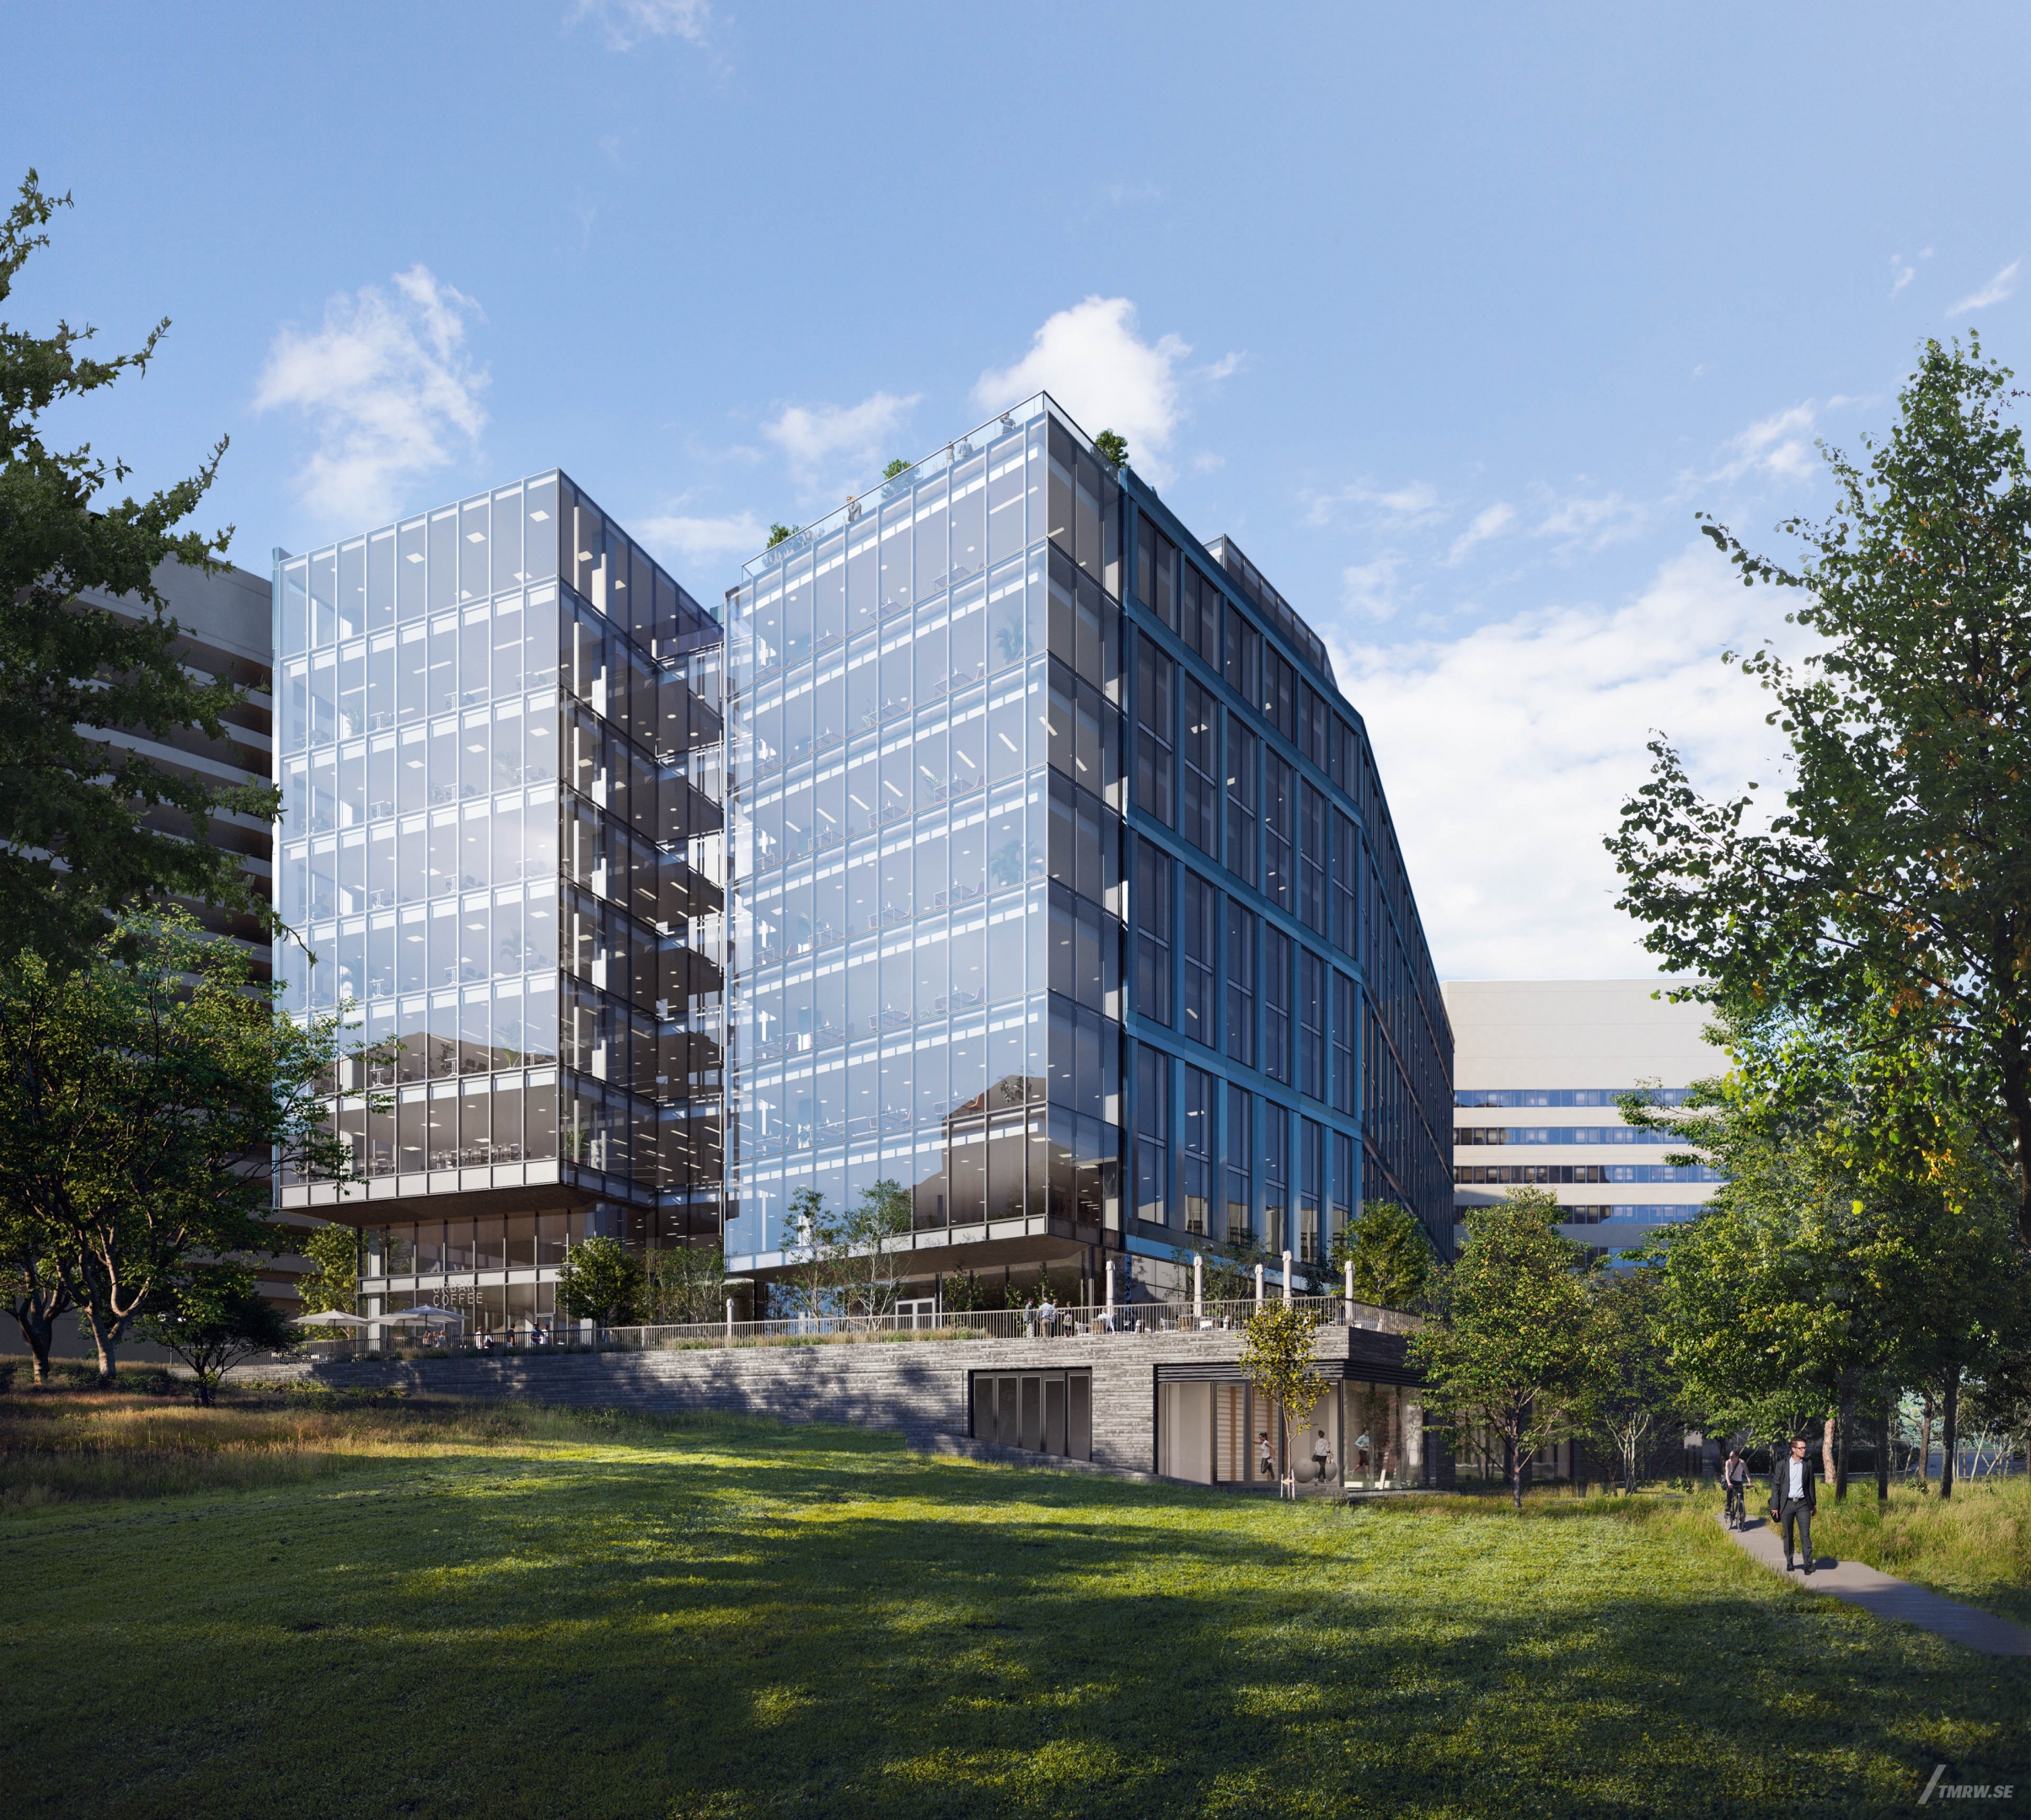 Architectural visualization of 101 12th Street for Studios, an office building in day light from an green park view.